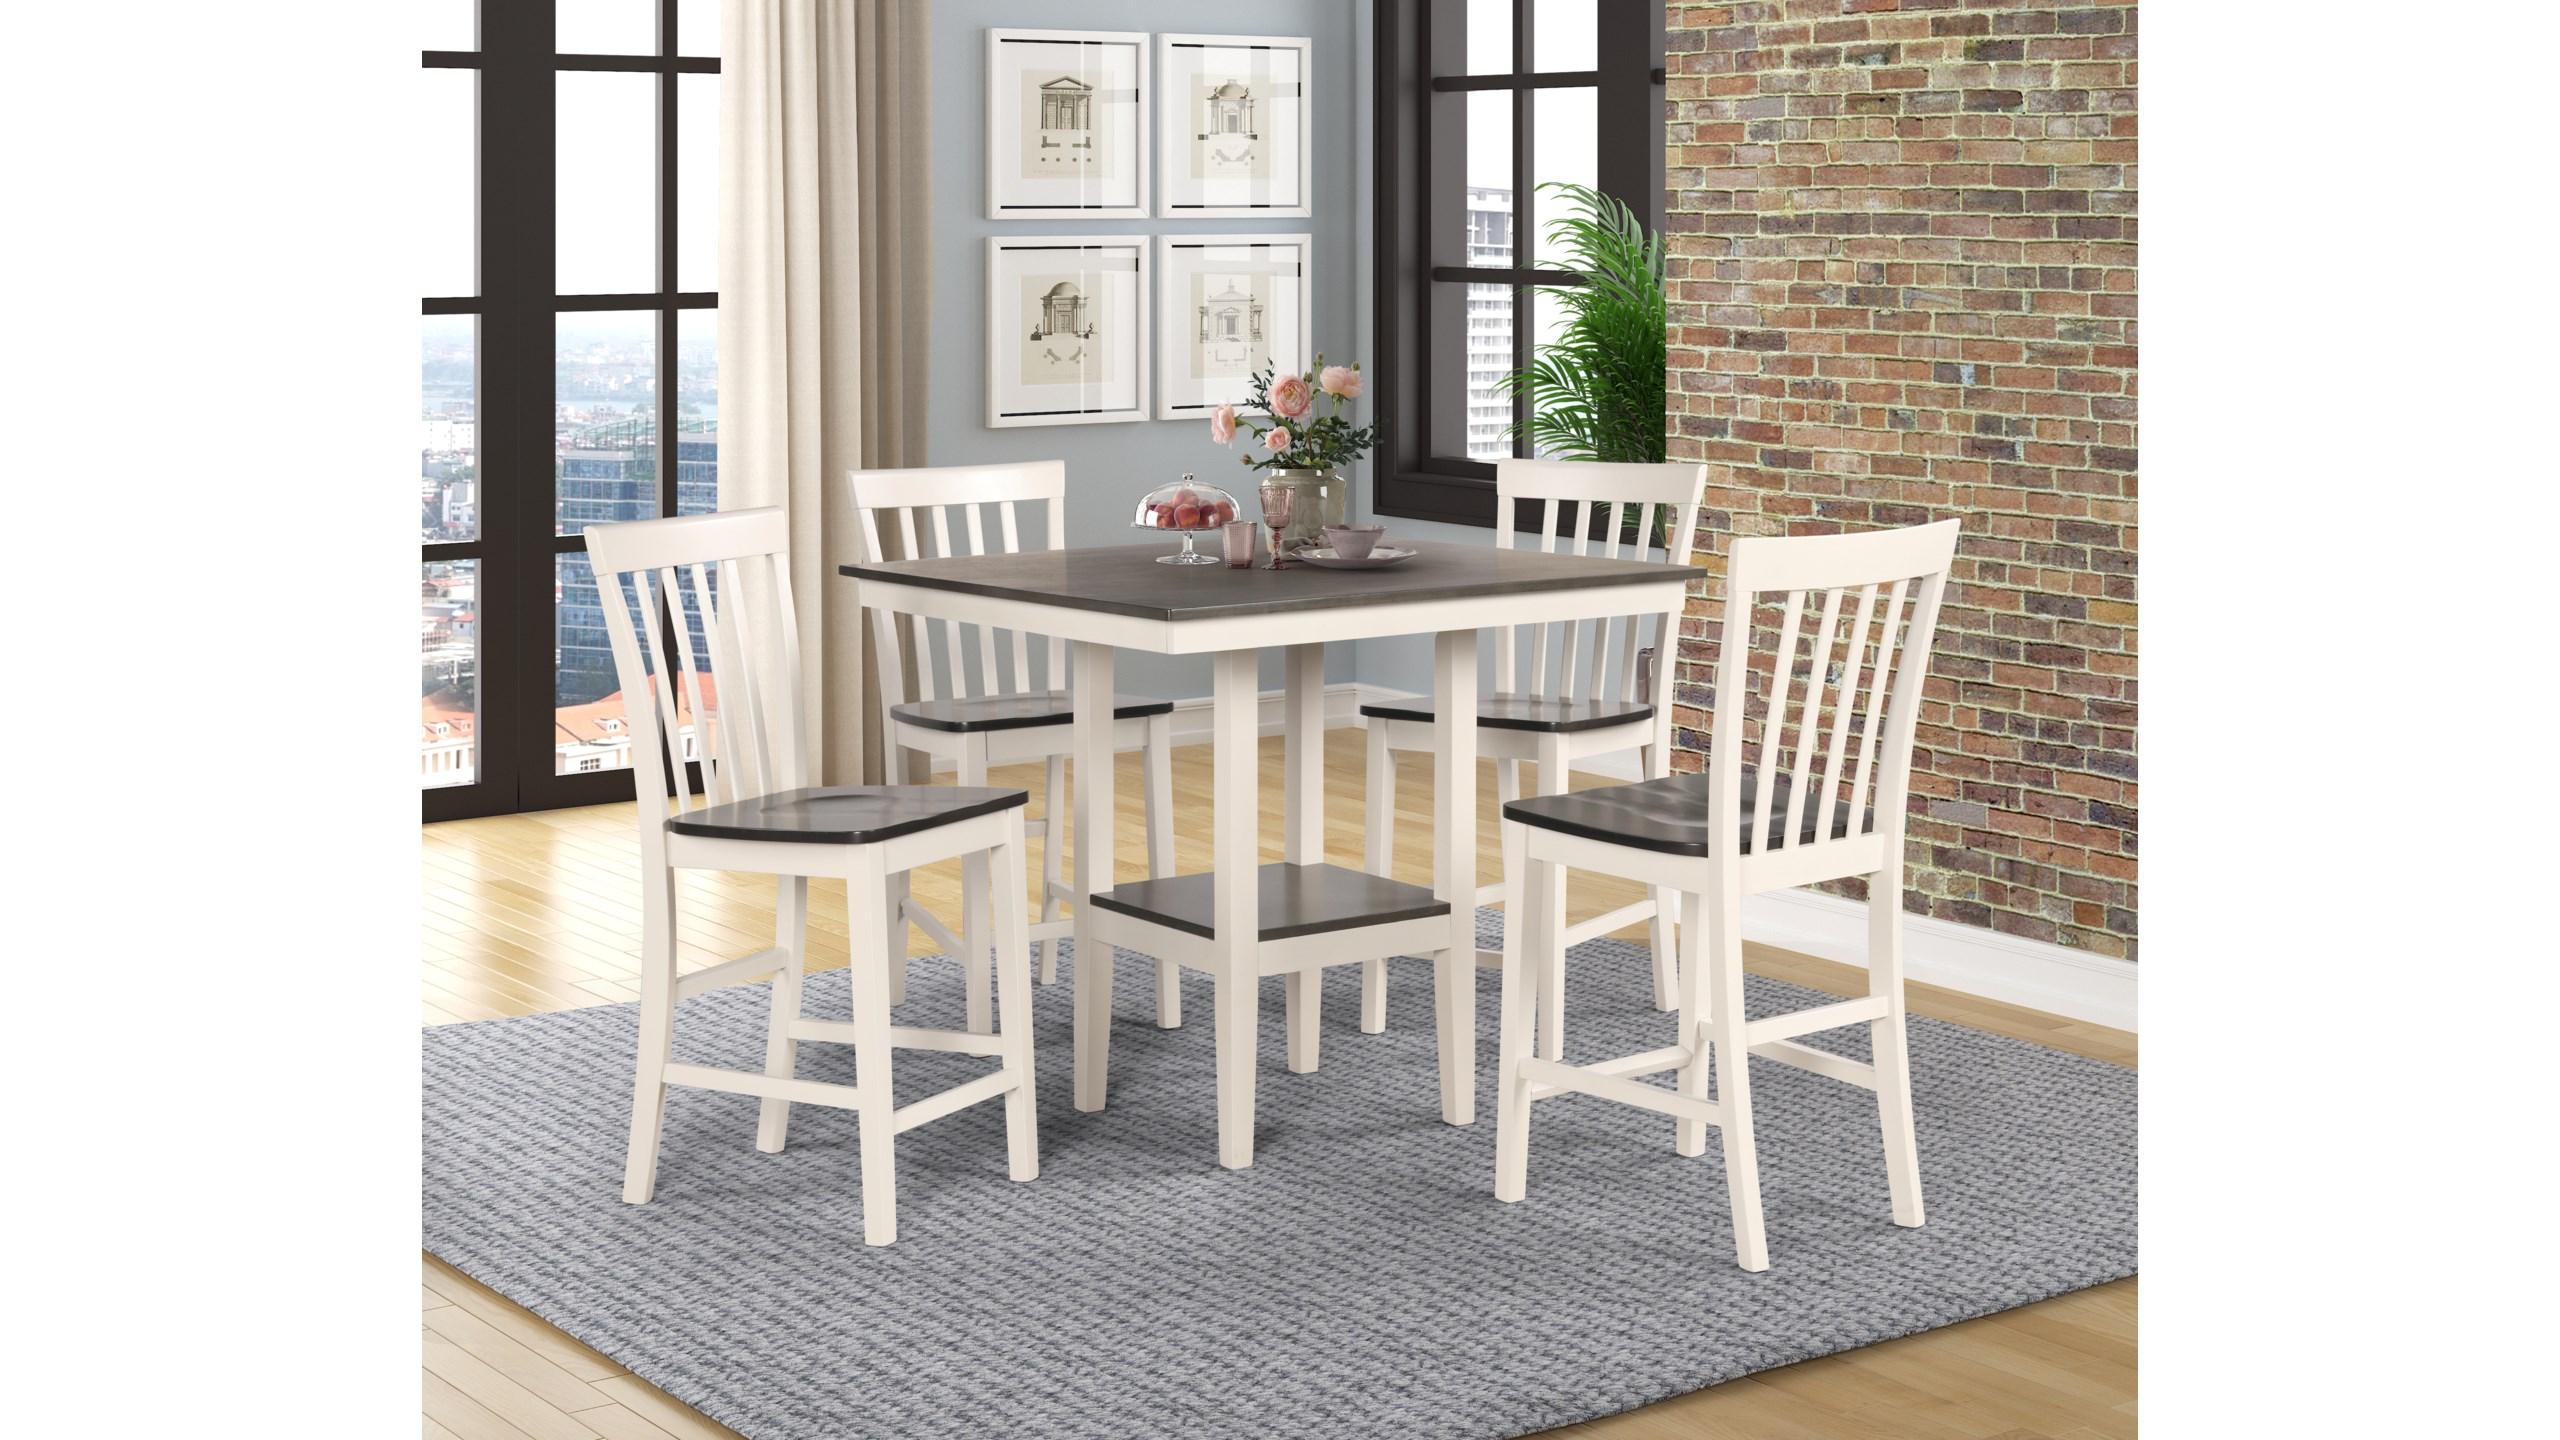 Simple, Farmhouse Counter Dining Set Brody 2682SET-WH/GY-5pcs in White 